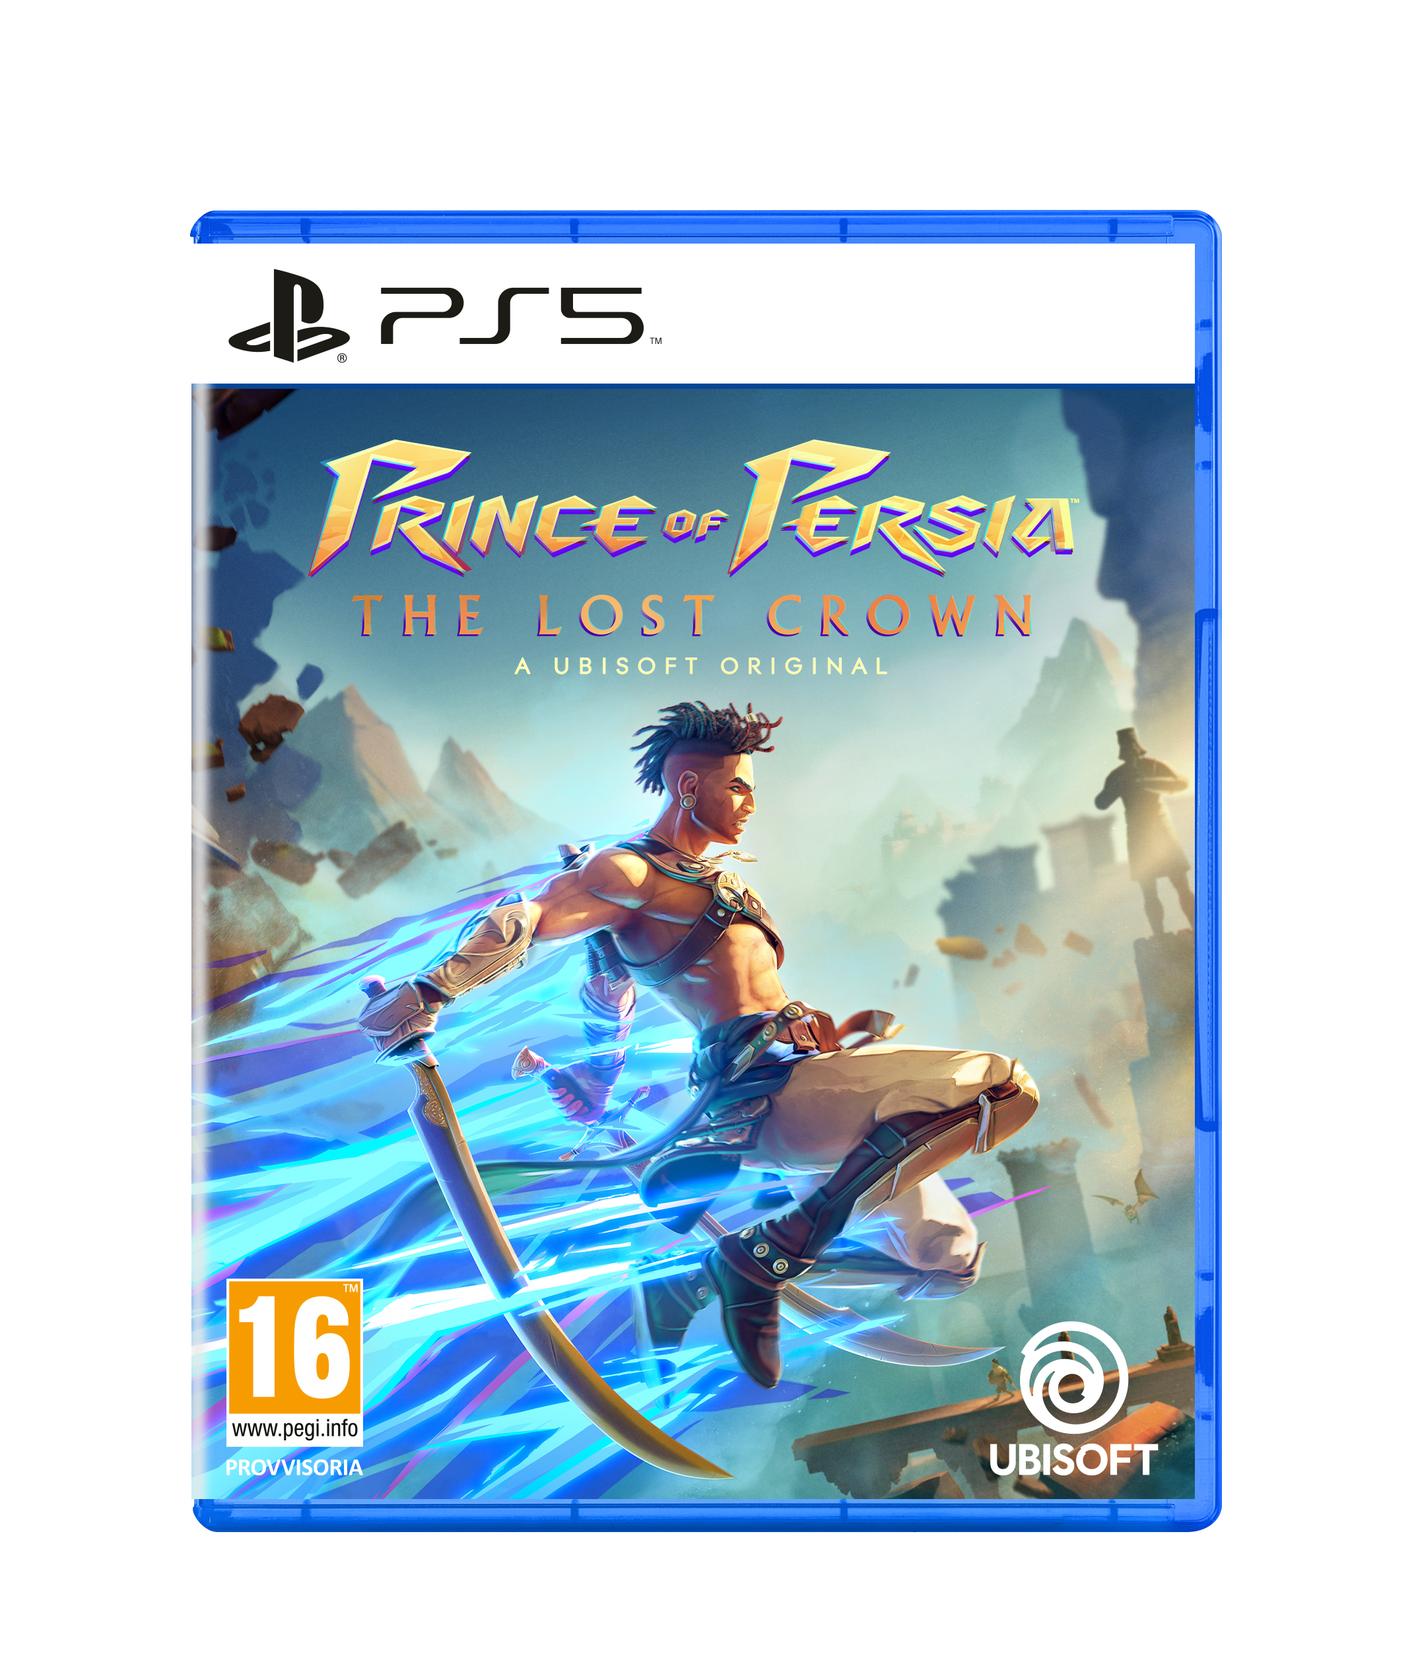 Offerta per Ubisoft - Prince of Persia: The Lost Crown PS5 a 39,99€ in Comet